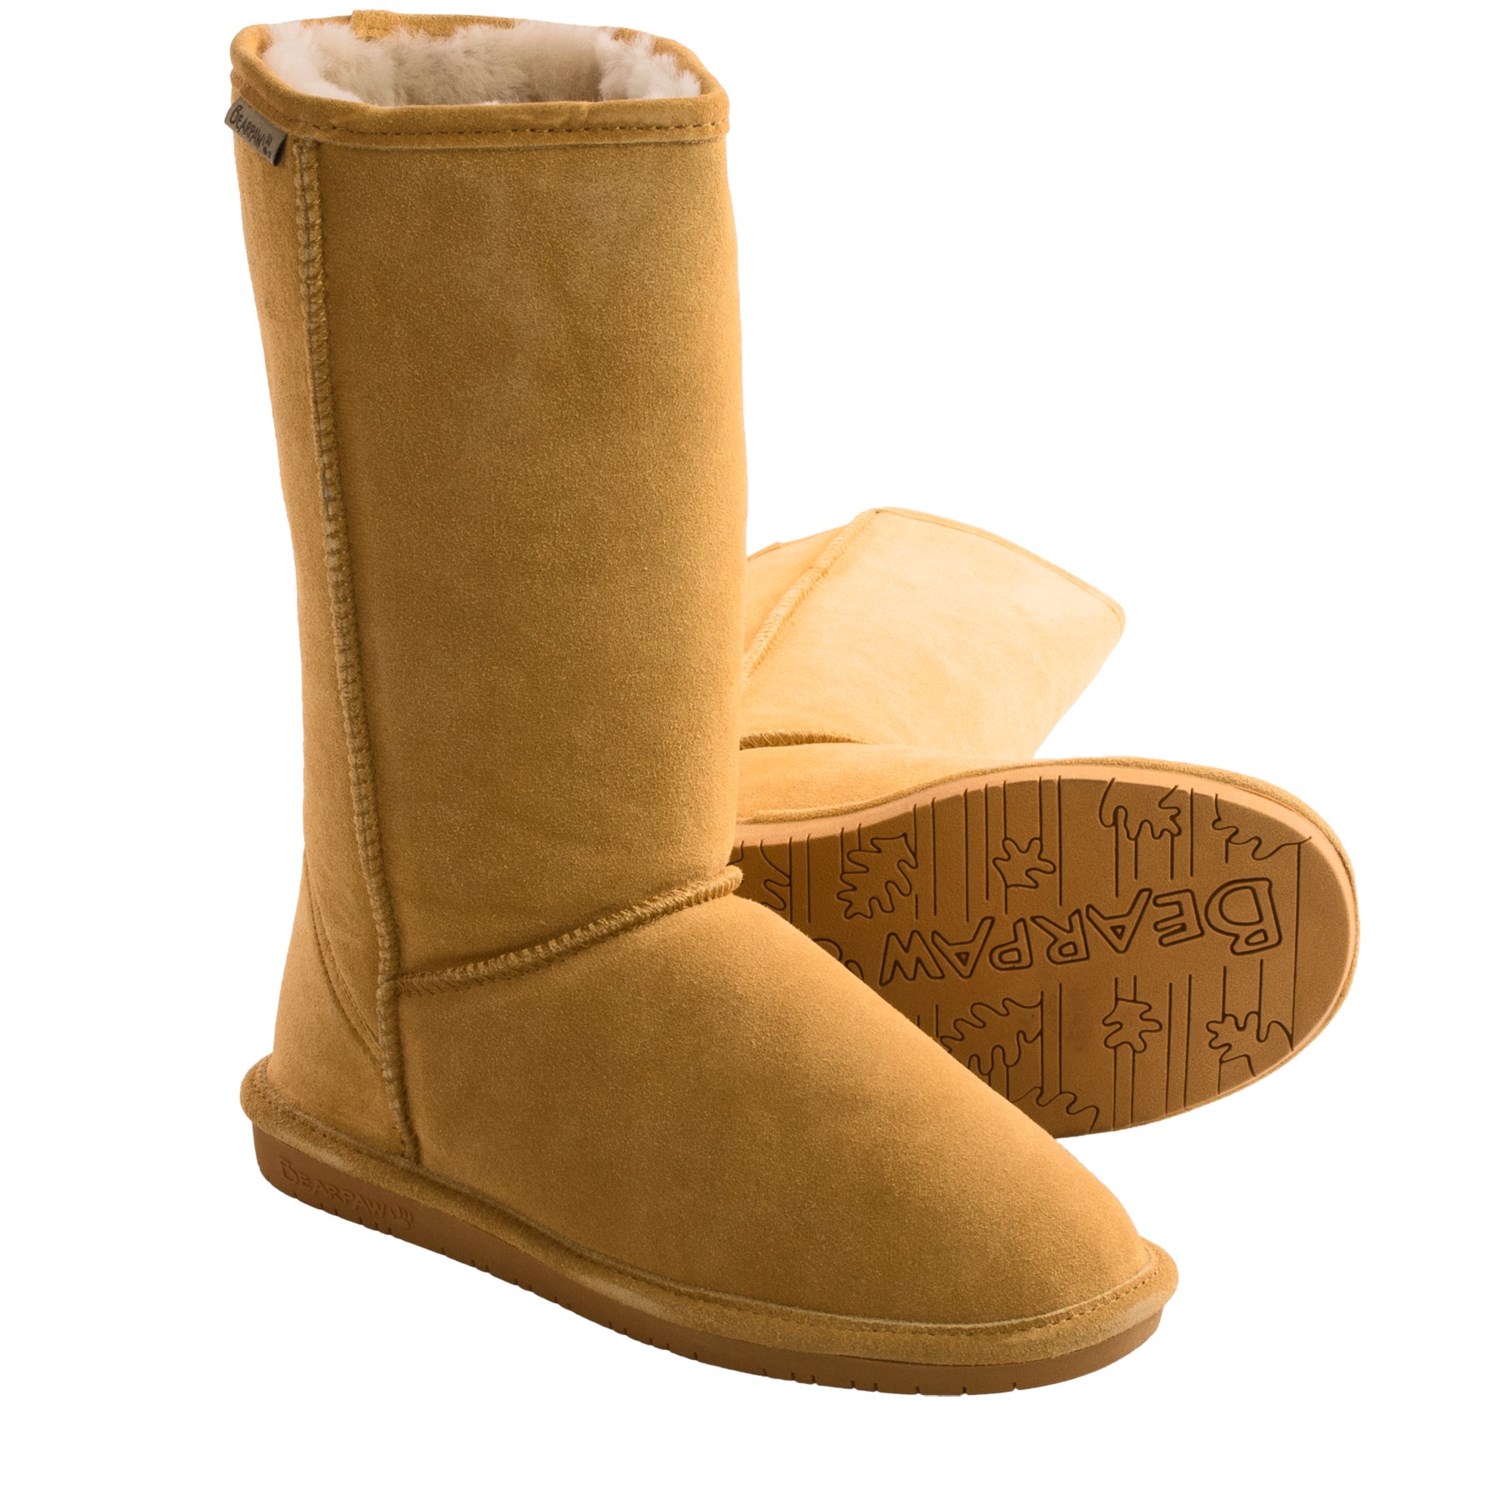 Bearpaw Emma Tall Boots (For Women) - Save 55%